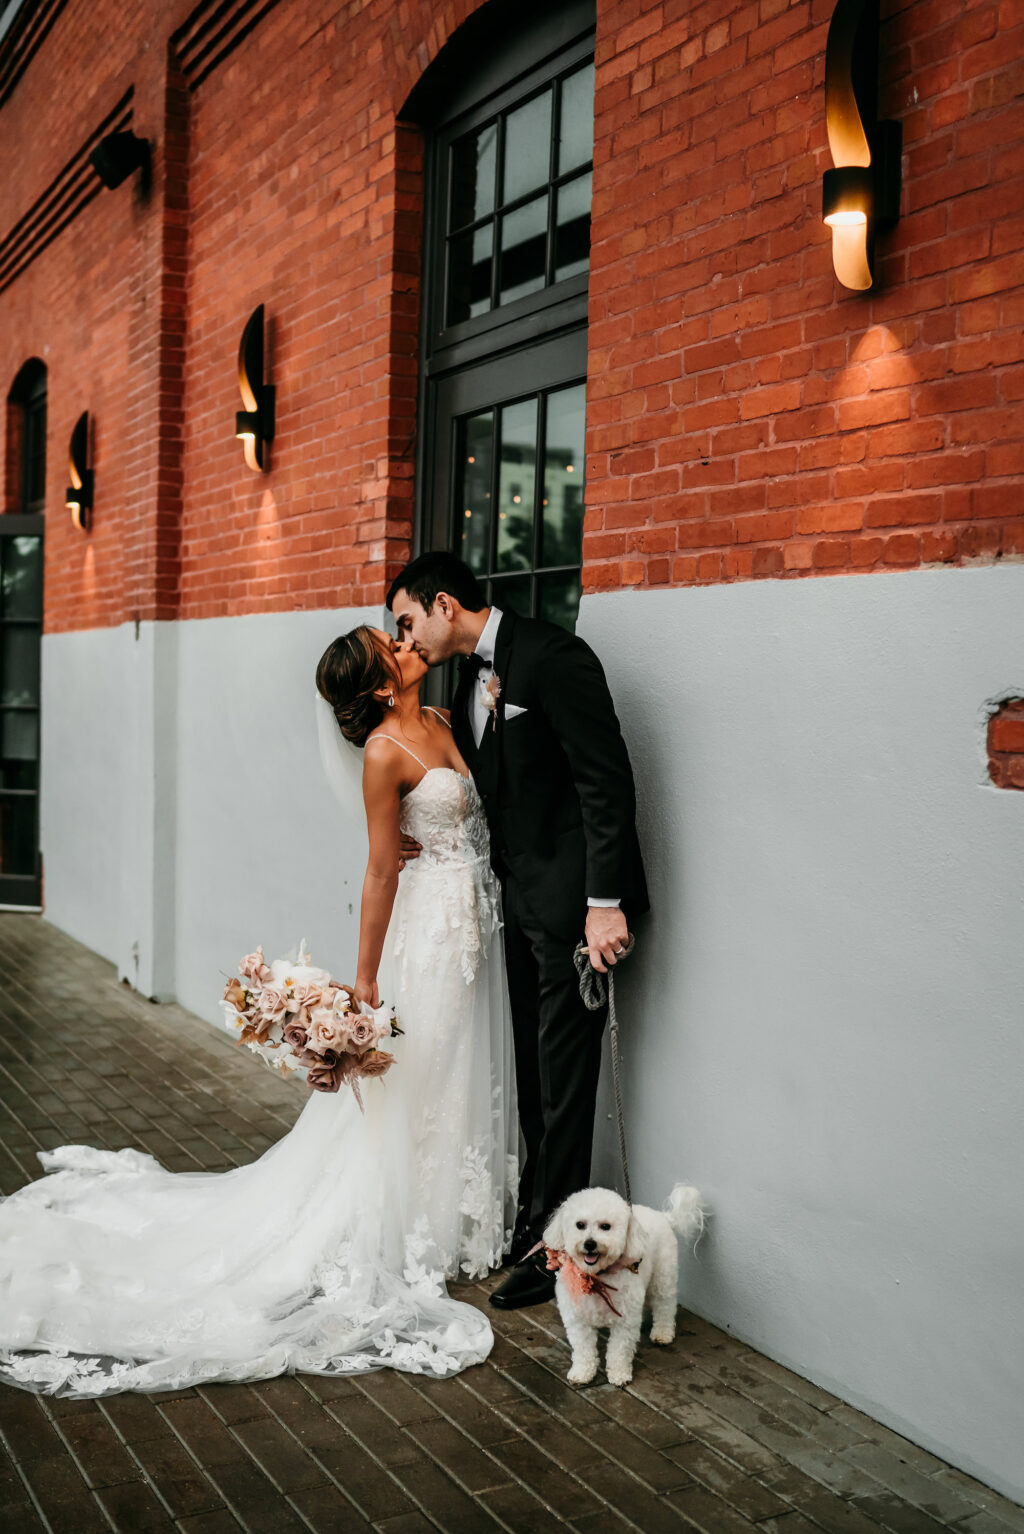 Bride and Groom Wedding Portrait with Their Dog Wedding Inspiration | Tampa Bay Videographer J&S Media